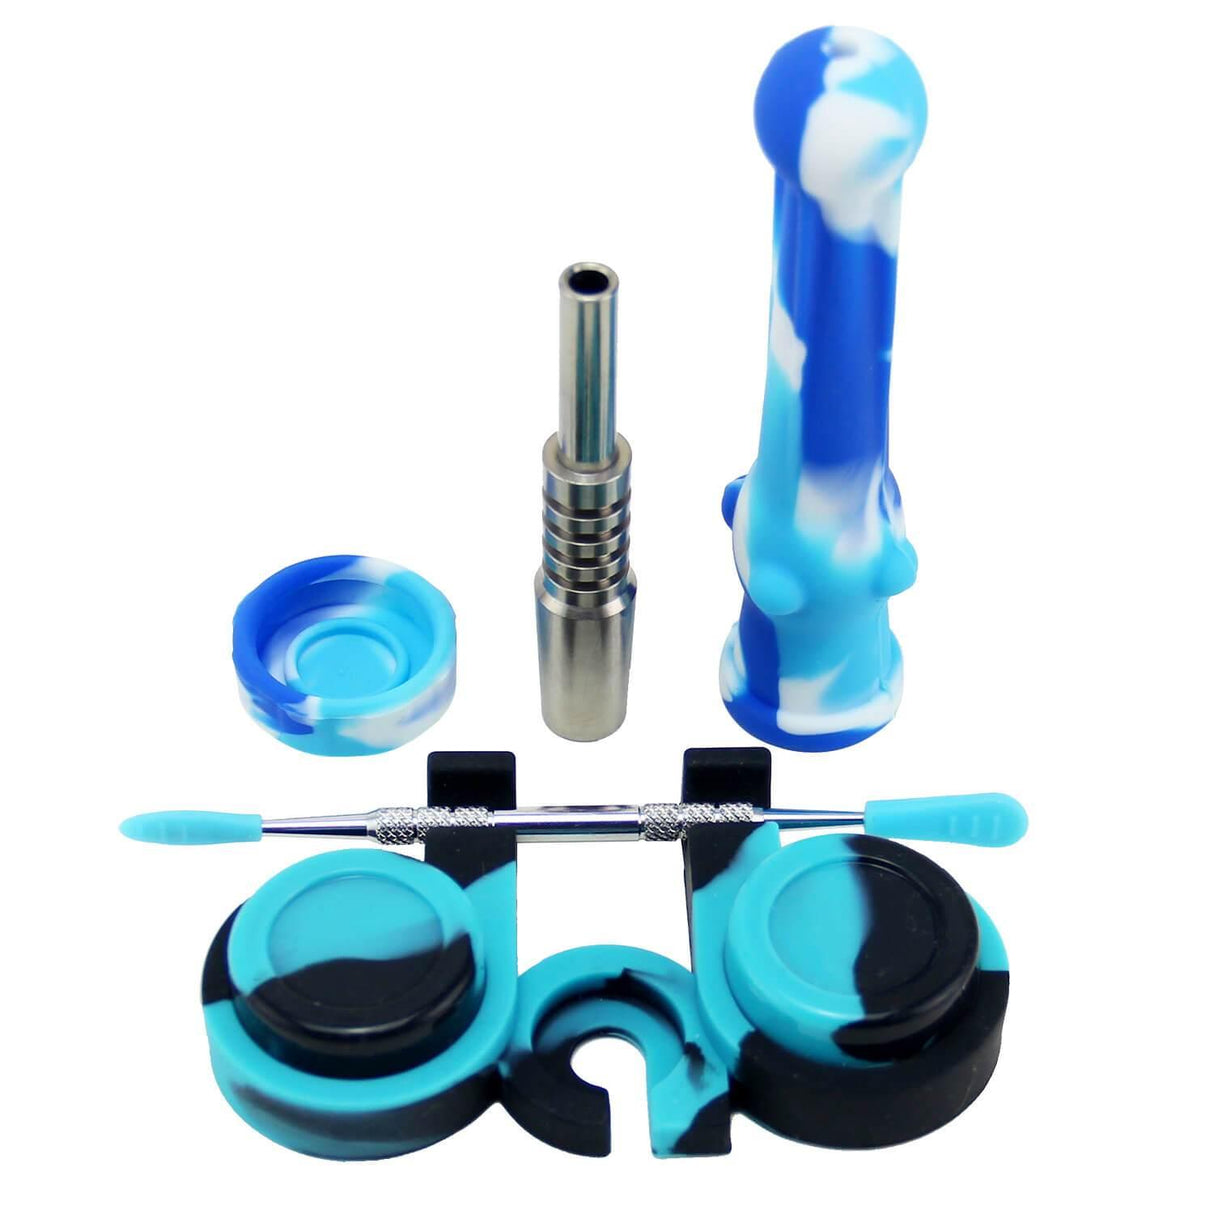 PILOT DIARY Silicone Nectar Collector Dab Kit in Blue Swirl, Front View with Accessories